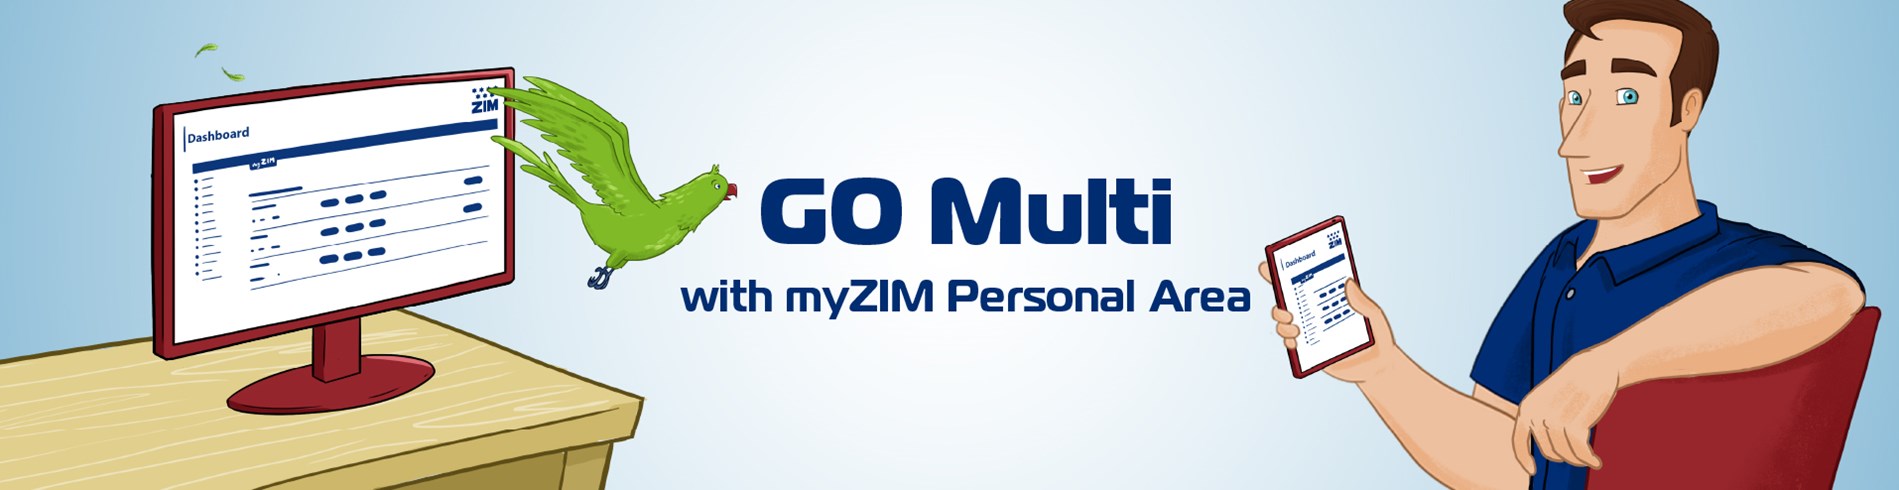 Go Multi with myZIM Personal Area